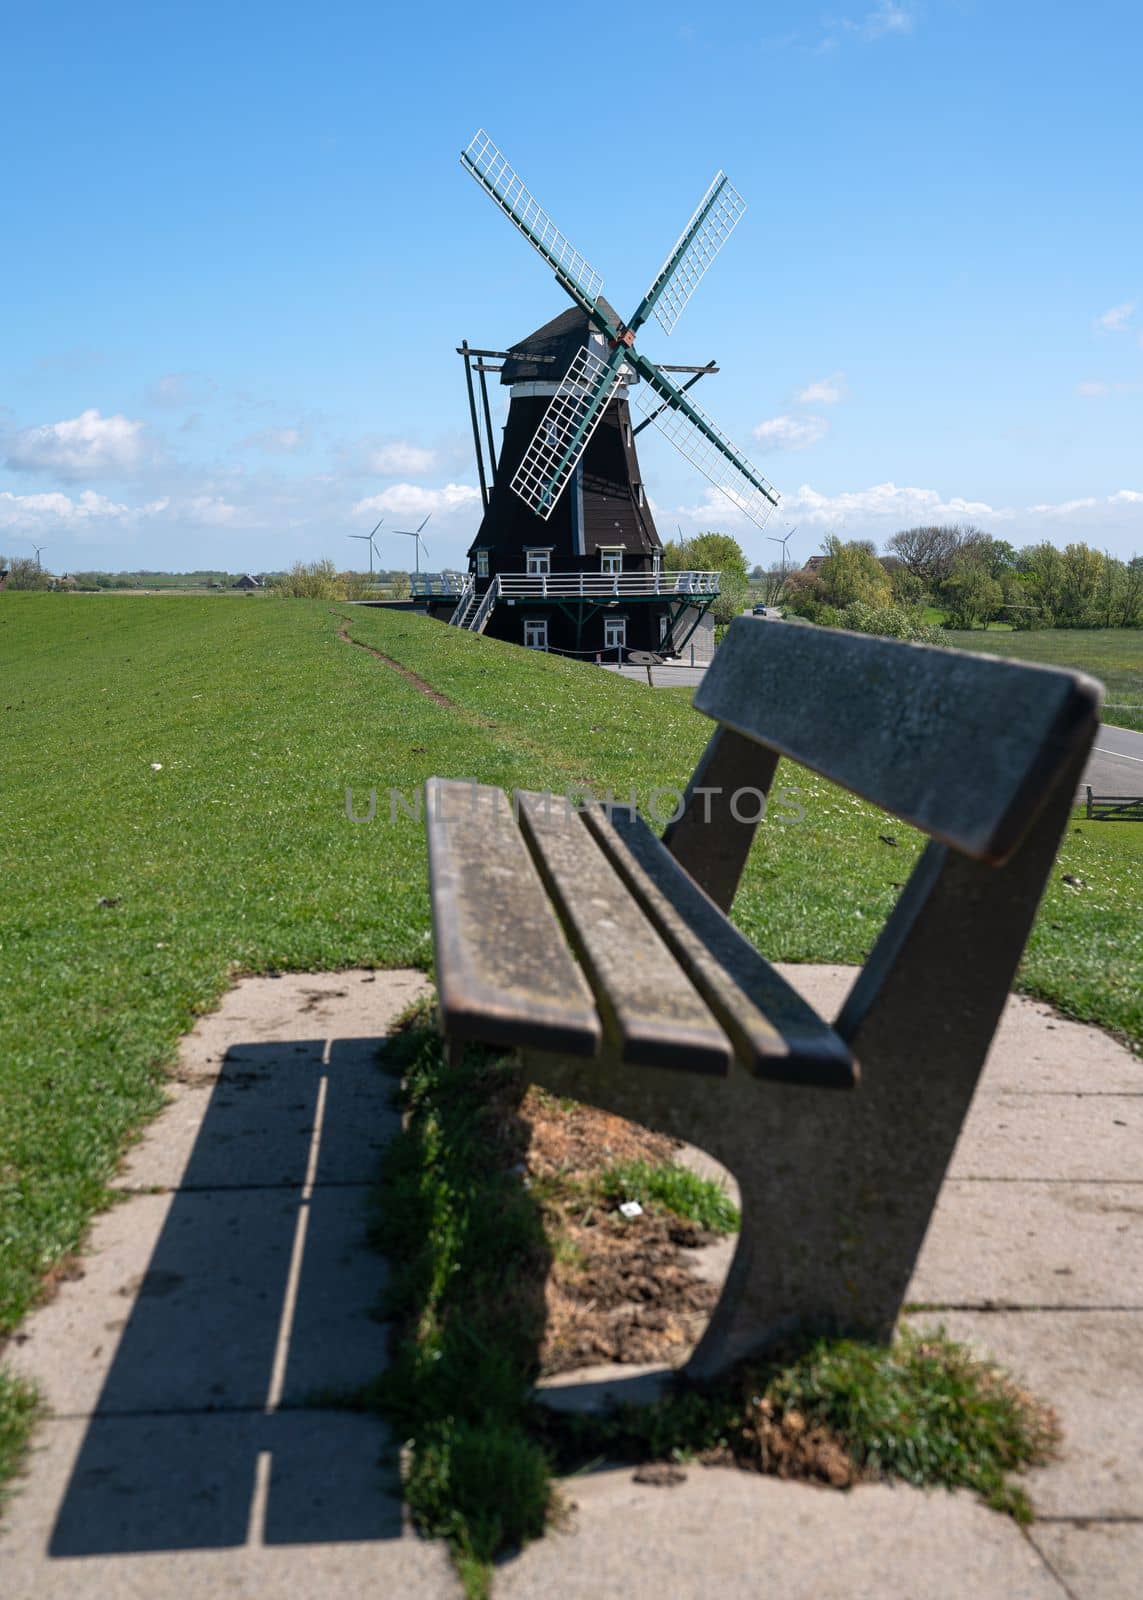 Panoramic image of the windmill of Pellworm against blue sky, North Frisia, Germany